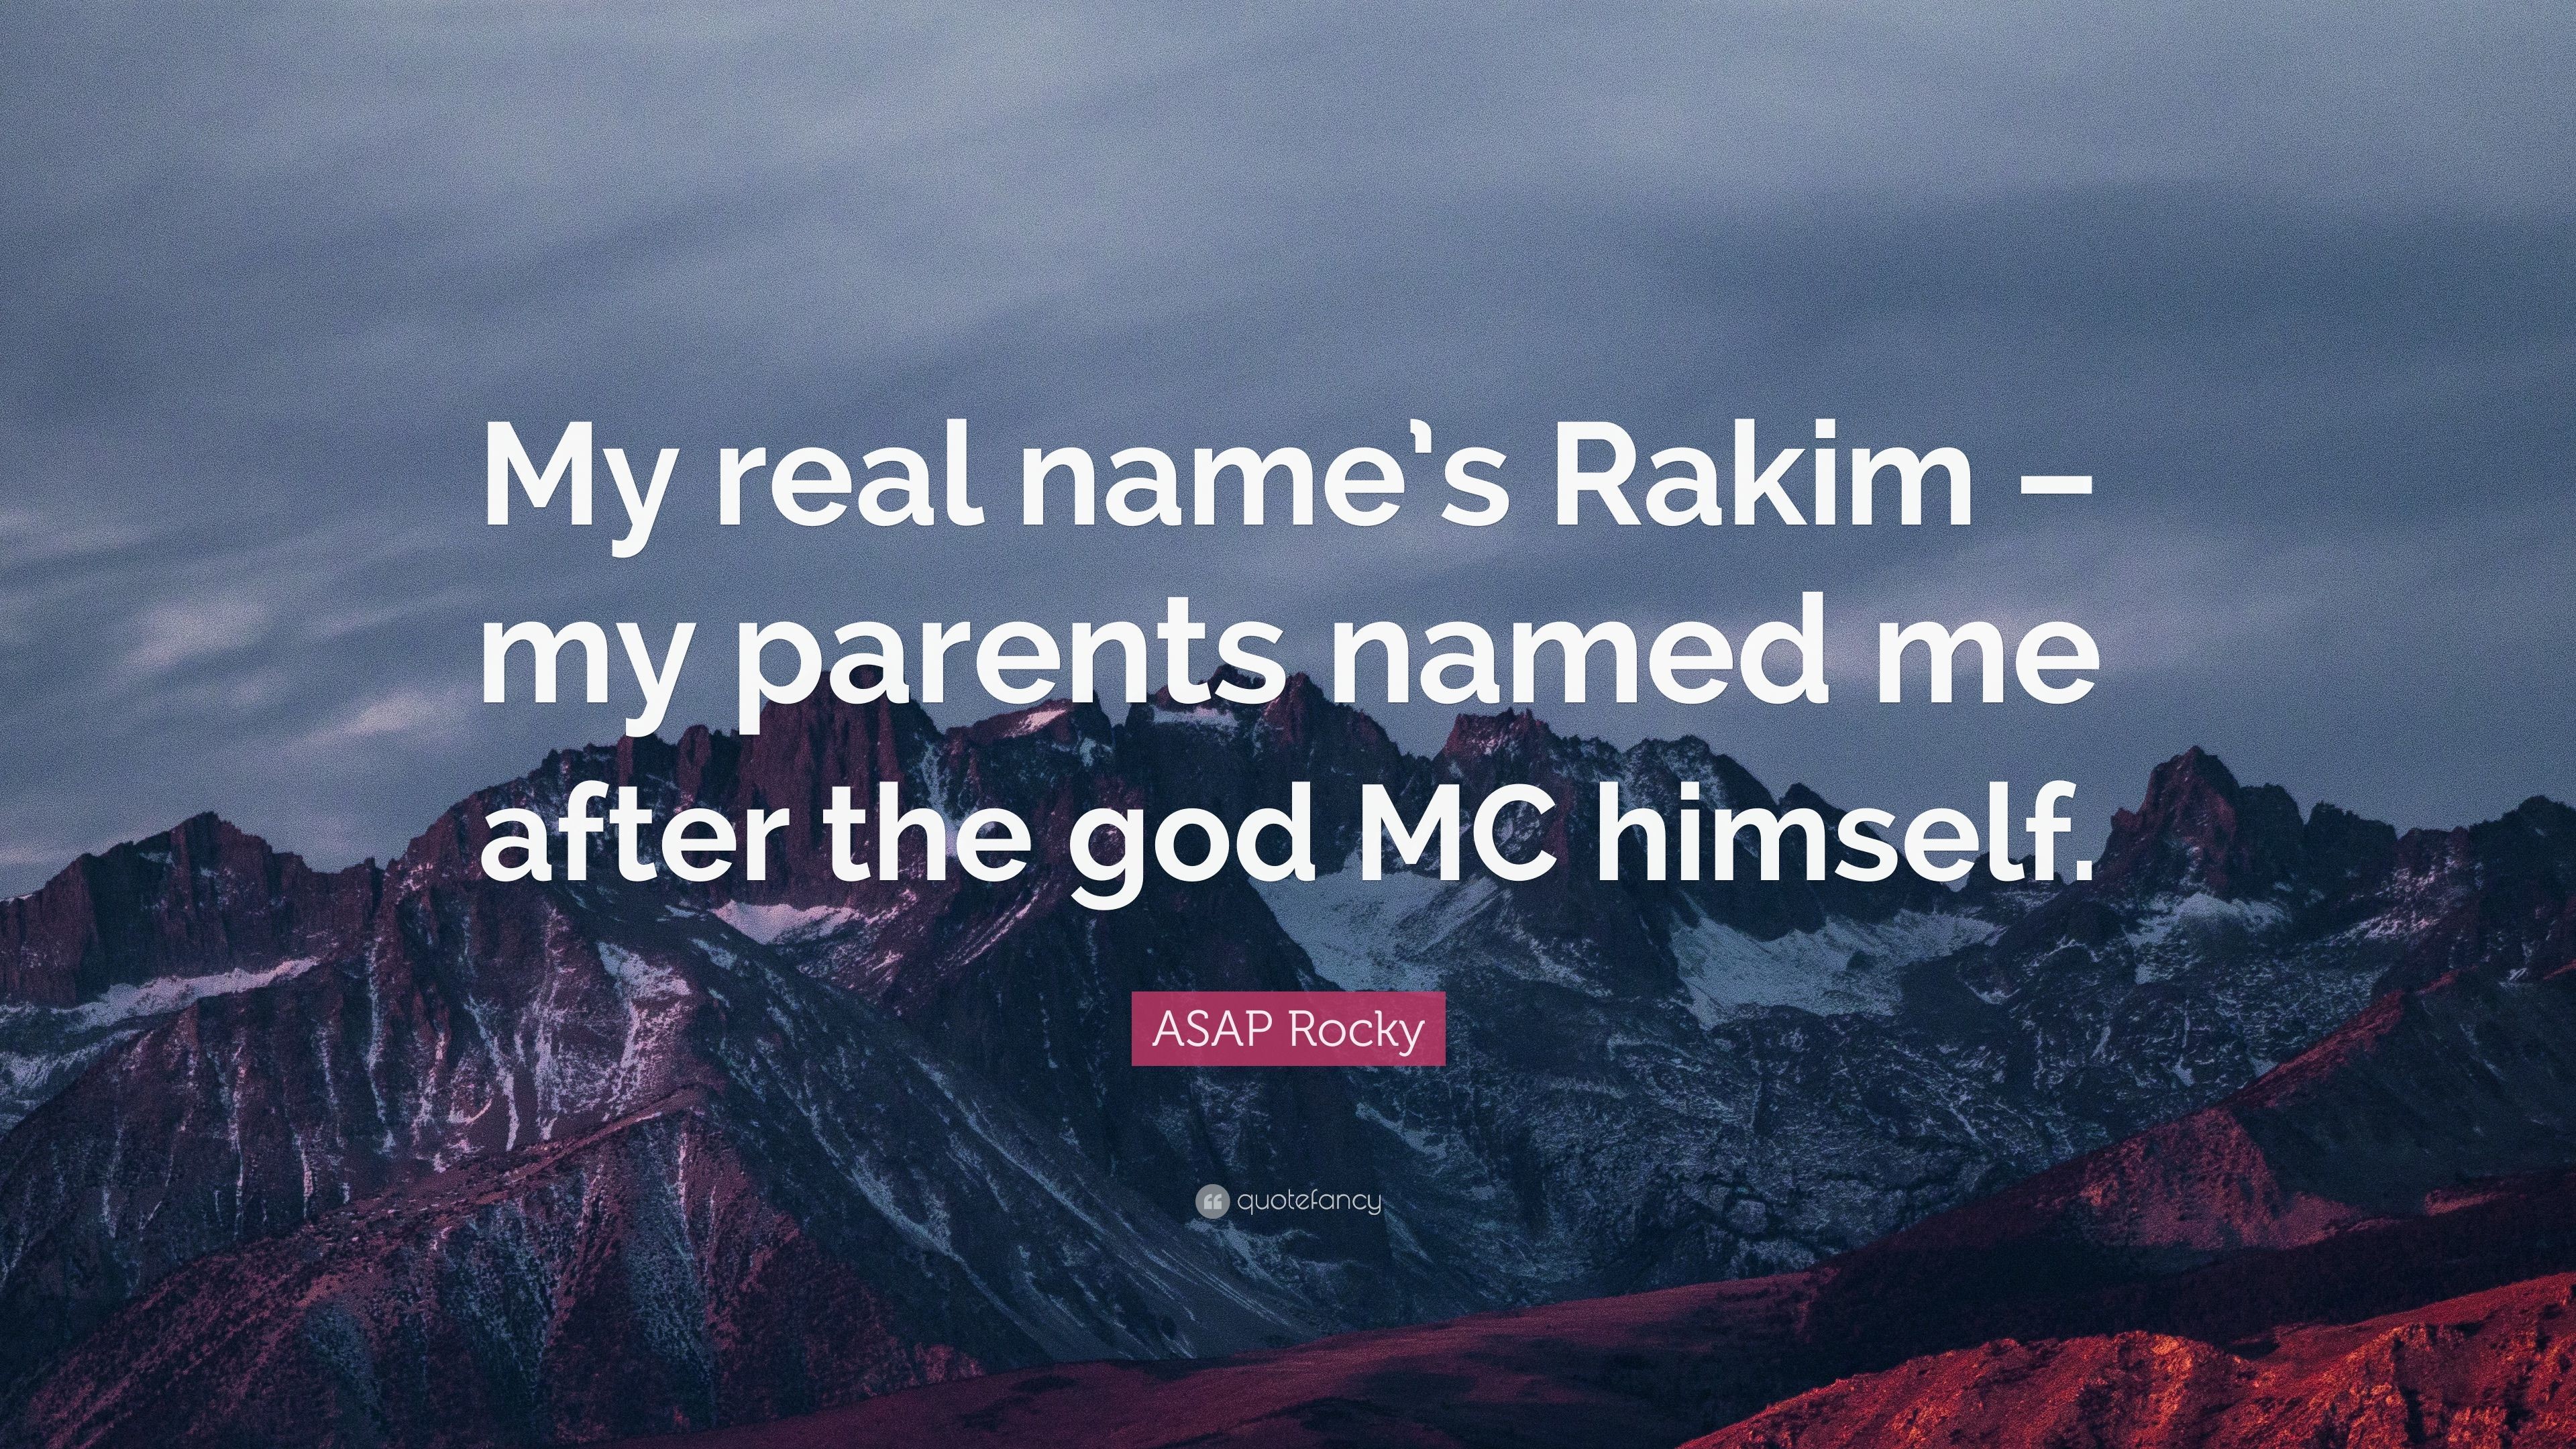 3840x2160 ASAP Rocky Quote: “My real name's Rakim – my parents named me after the